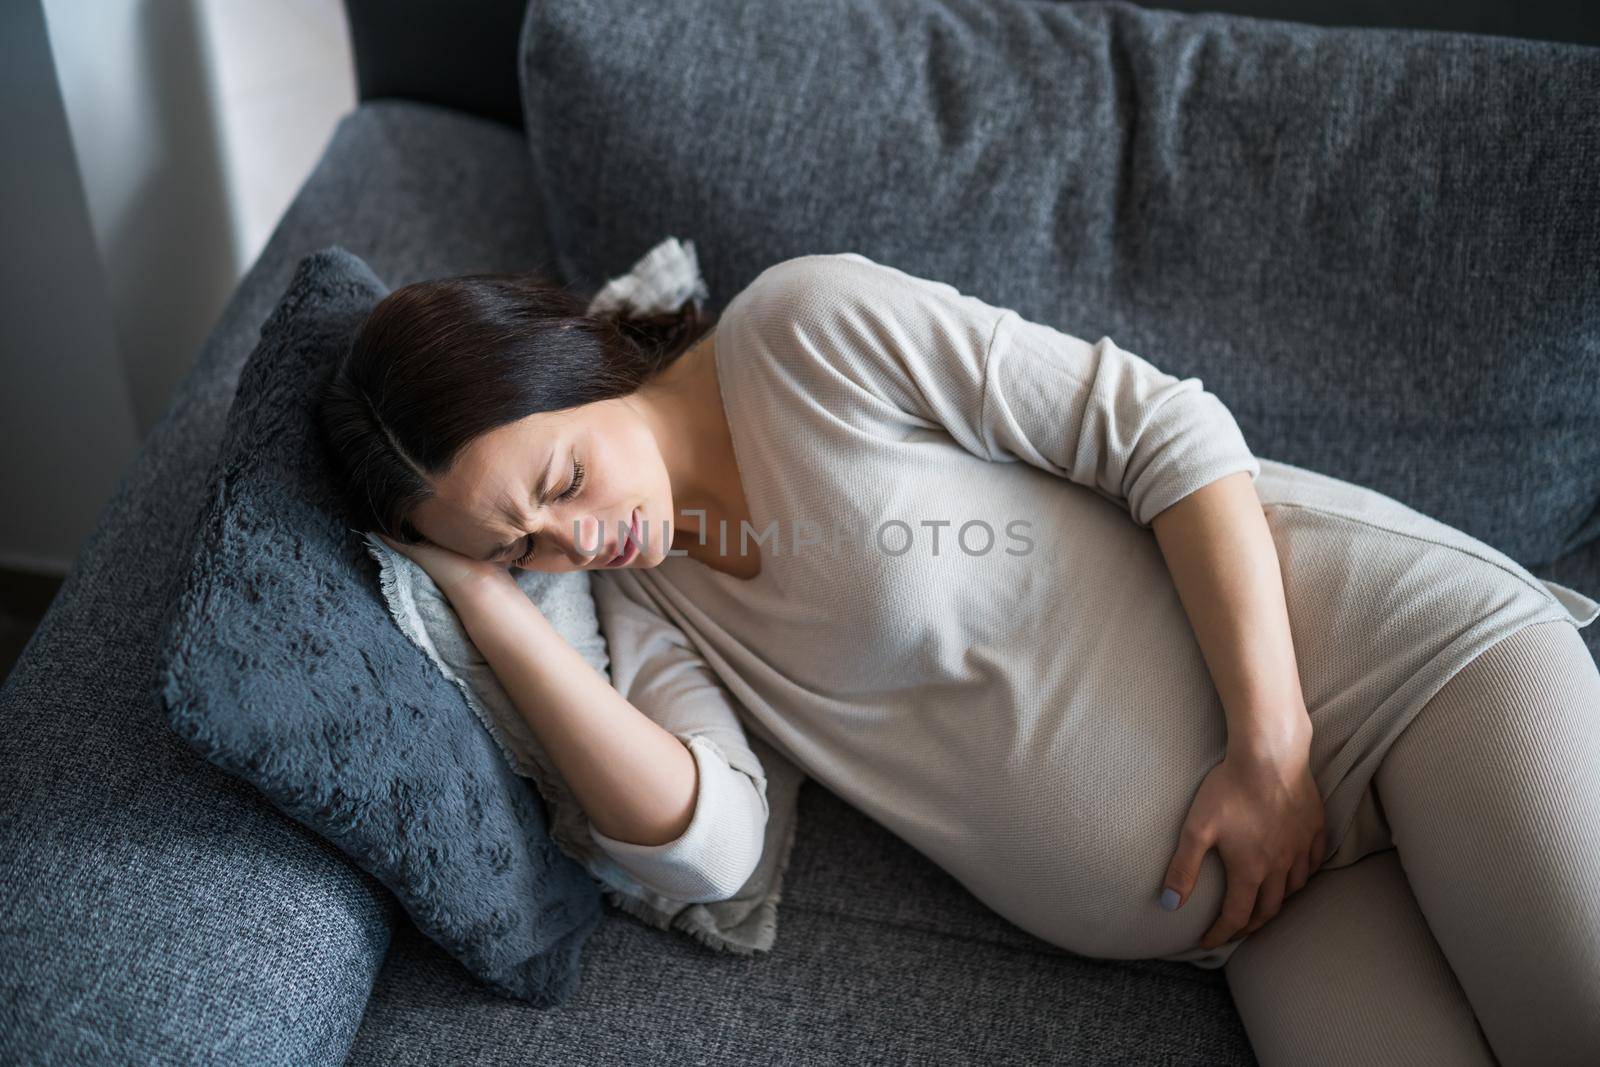 Pregnant woman is having pain in her back. She is lying on bed at home.